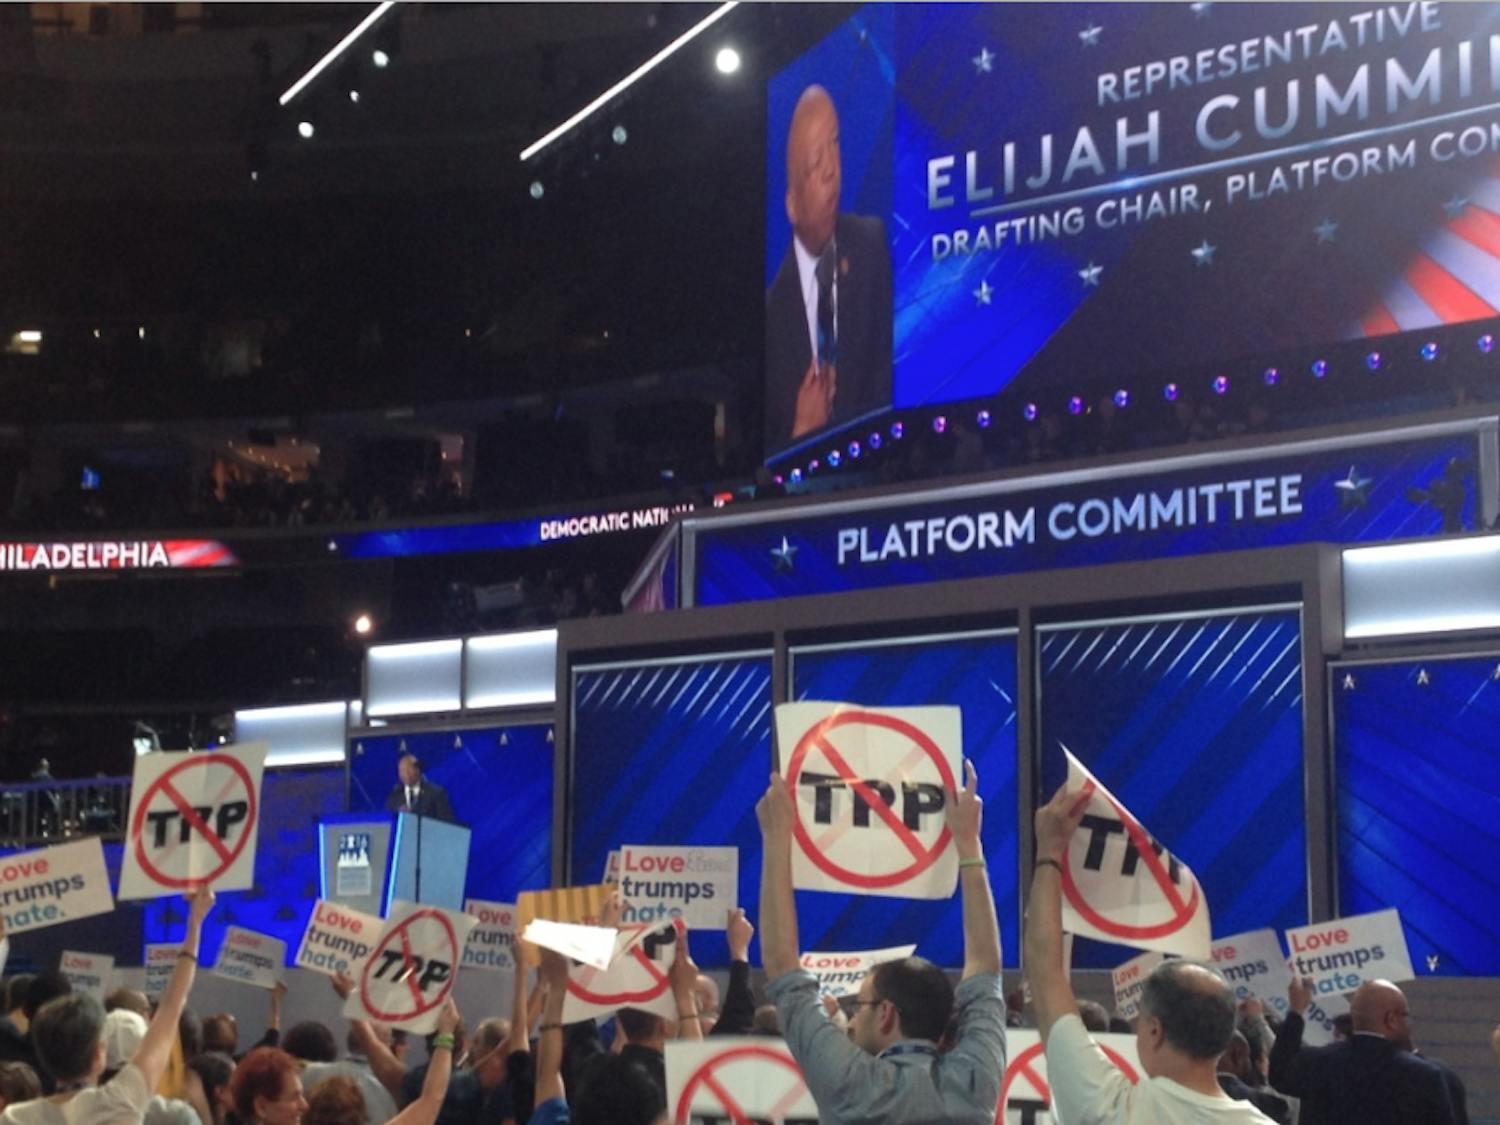 Maryland Congressman Elijah Cummings speaks on the first day of the Democratic National Convention in Philadelphia on July 25, 2016.